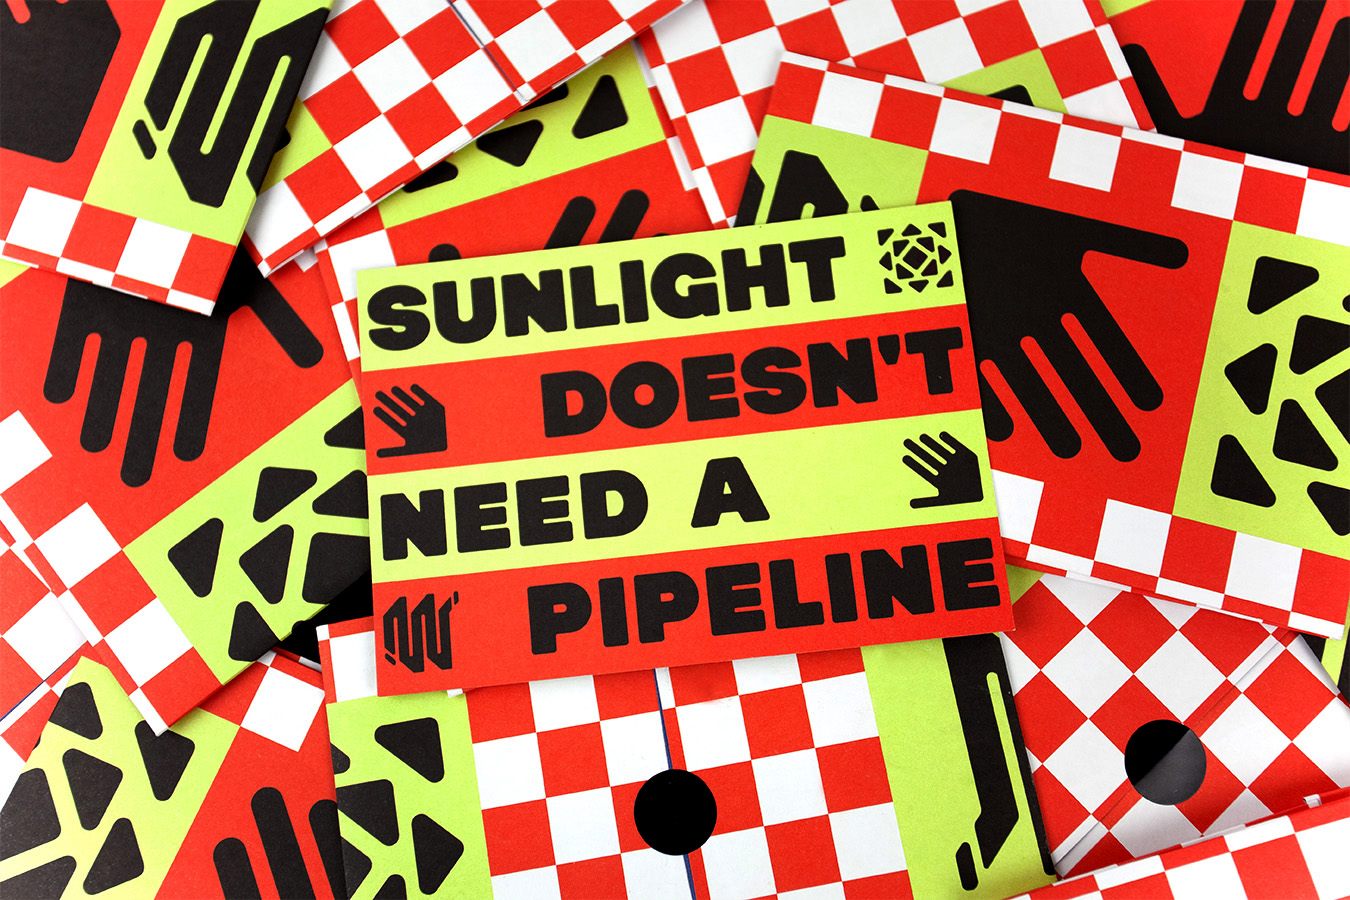 A pile of Sunlight Doesn't Need a Pipeline Postcards and fold out posters.